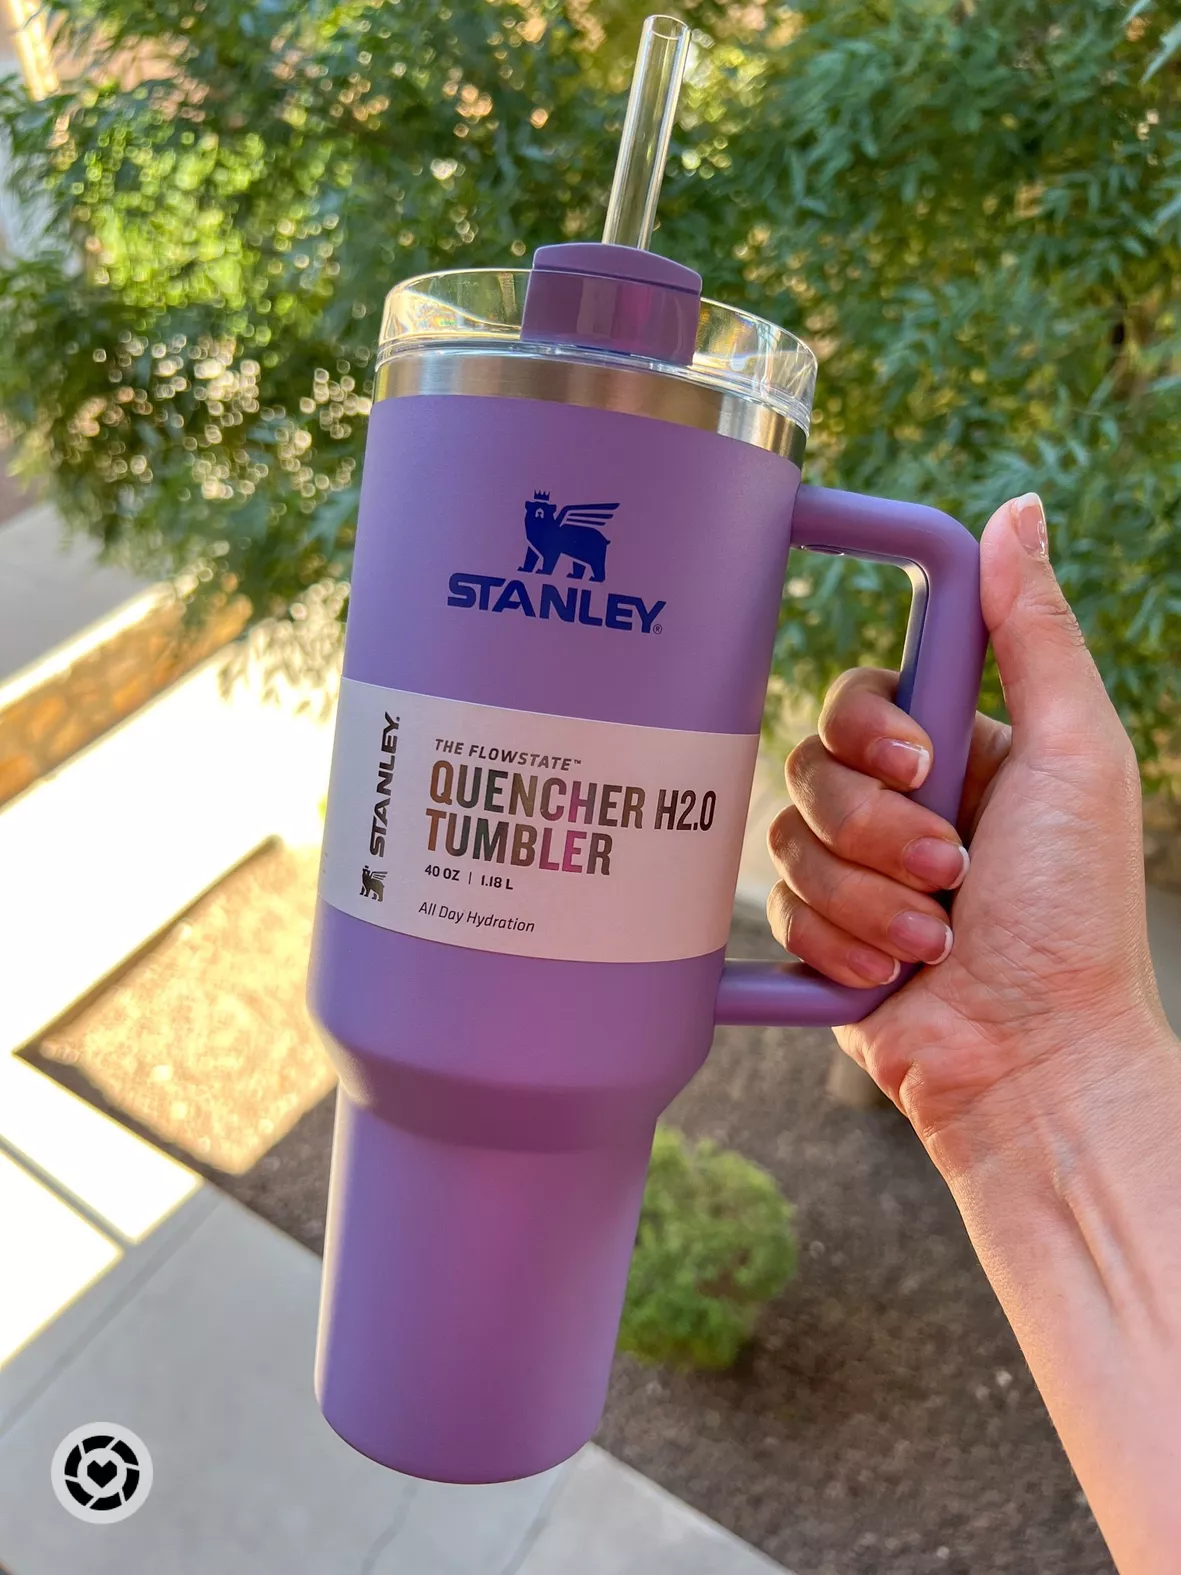 Stanley 40 oz Tumbler With Straw & Handle New H2.0 Flowstate vs Adventure  Quencher 